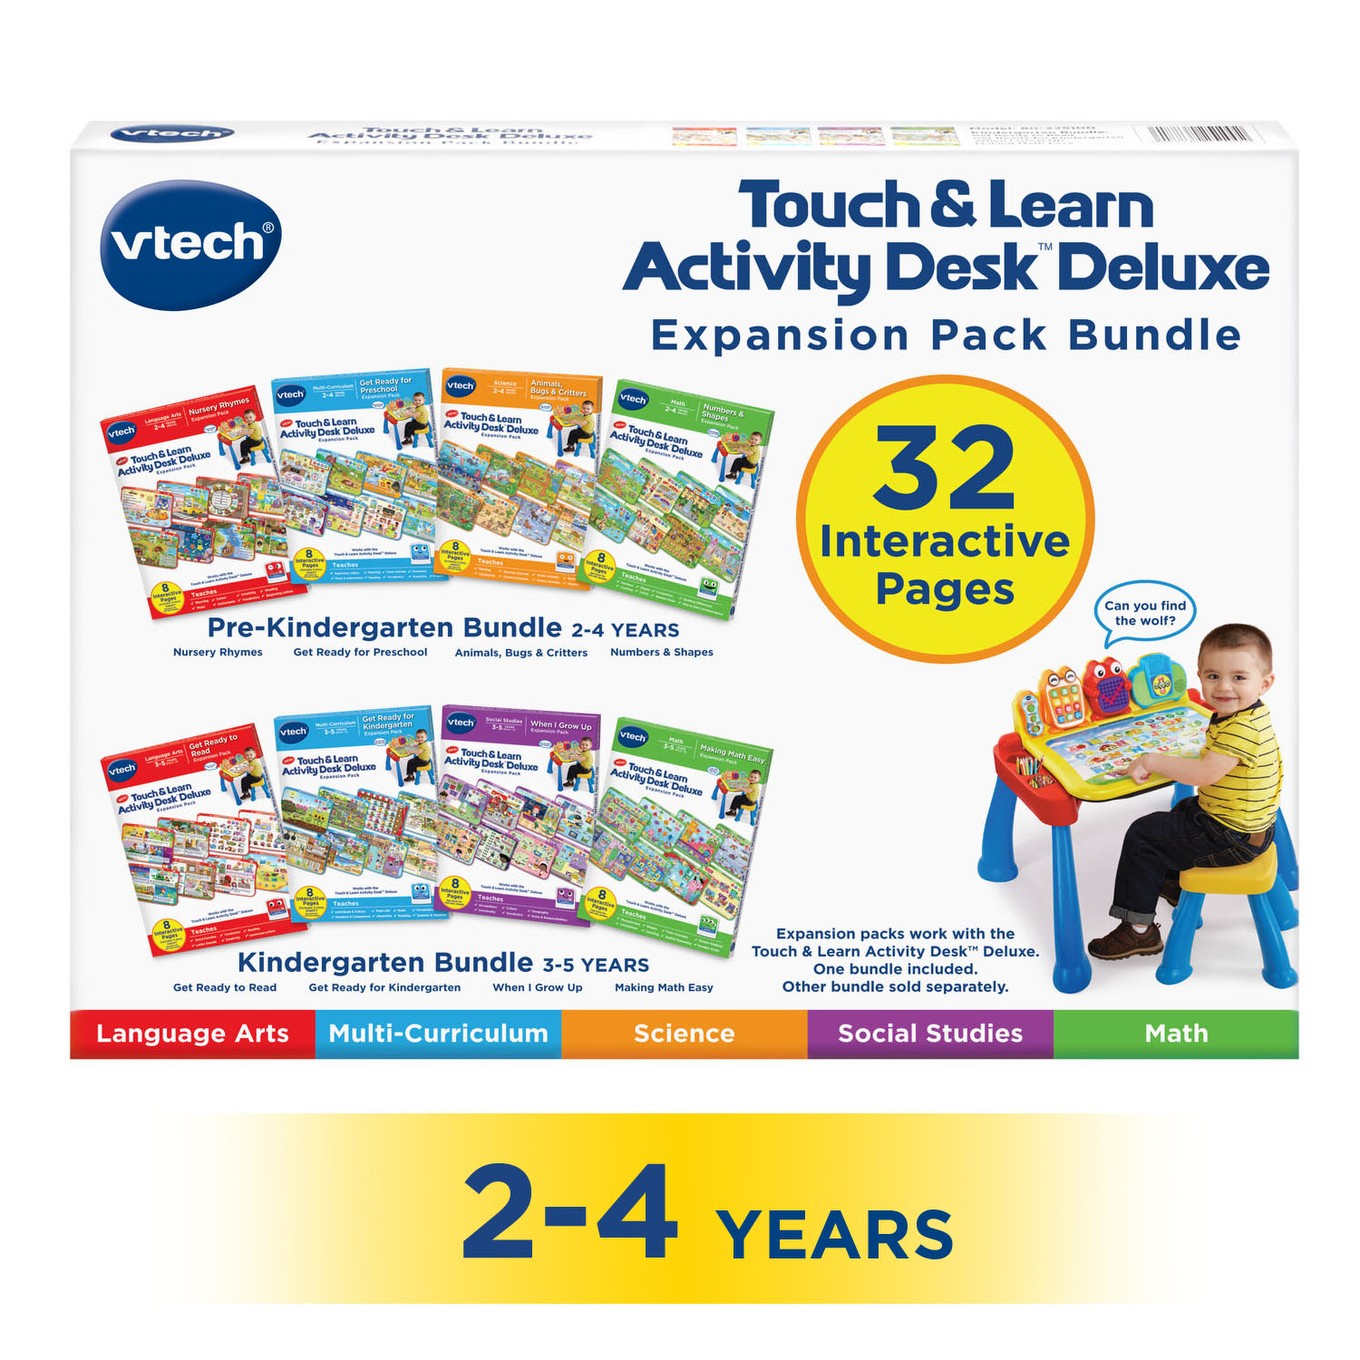 Vtech Touch /& Learn Activity Desk Deluxe 2 In 1 Preschool Bundle Expansion Pack